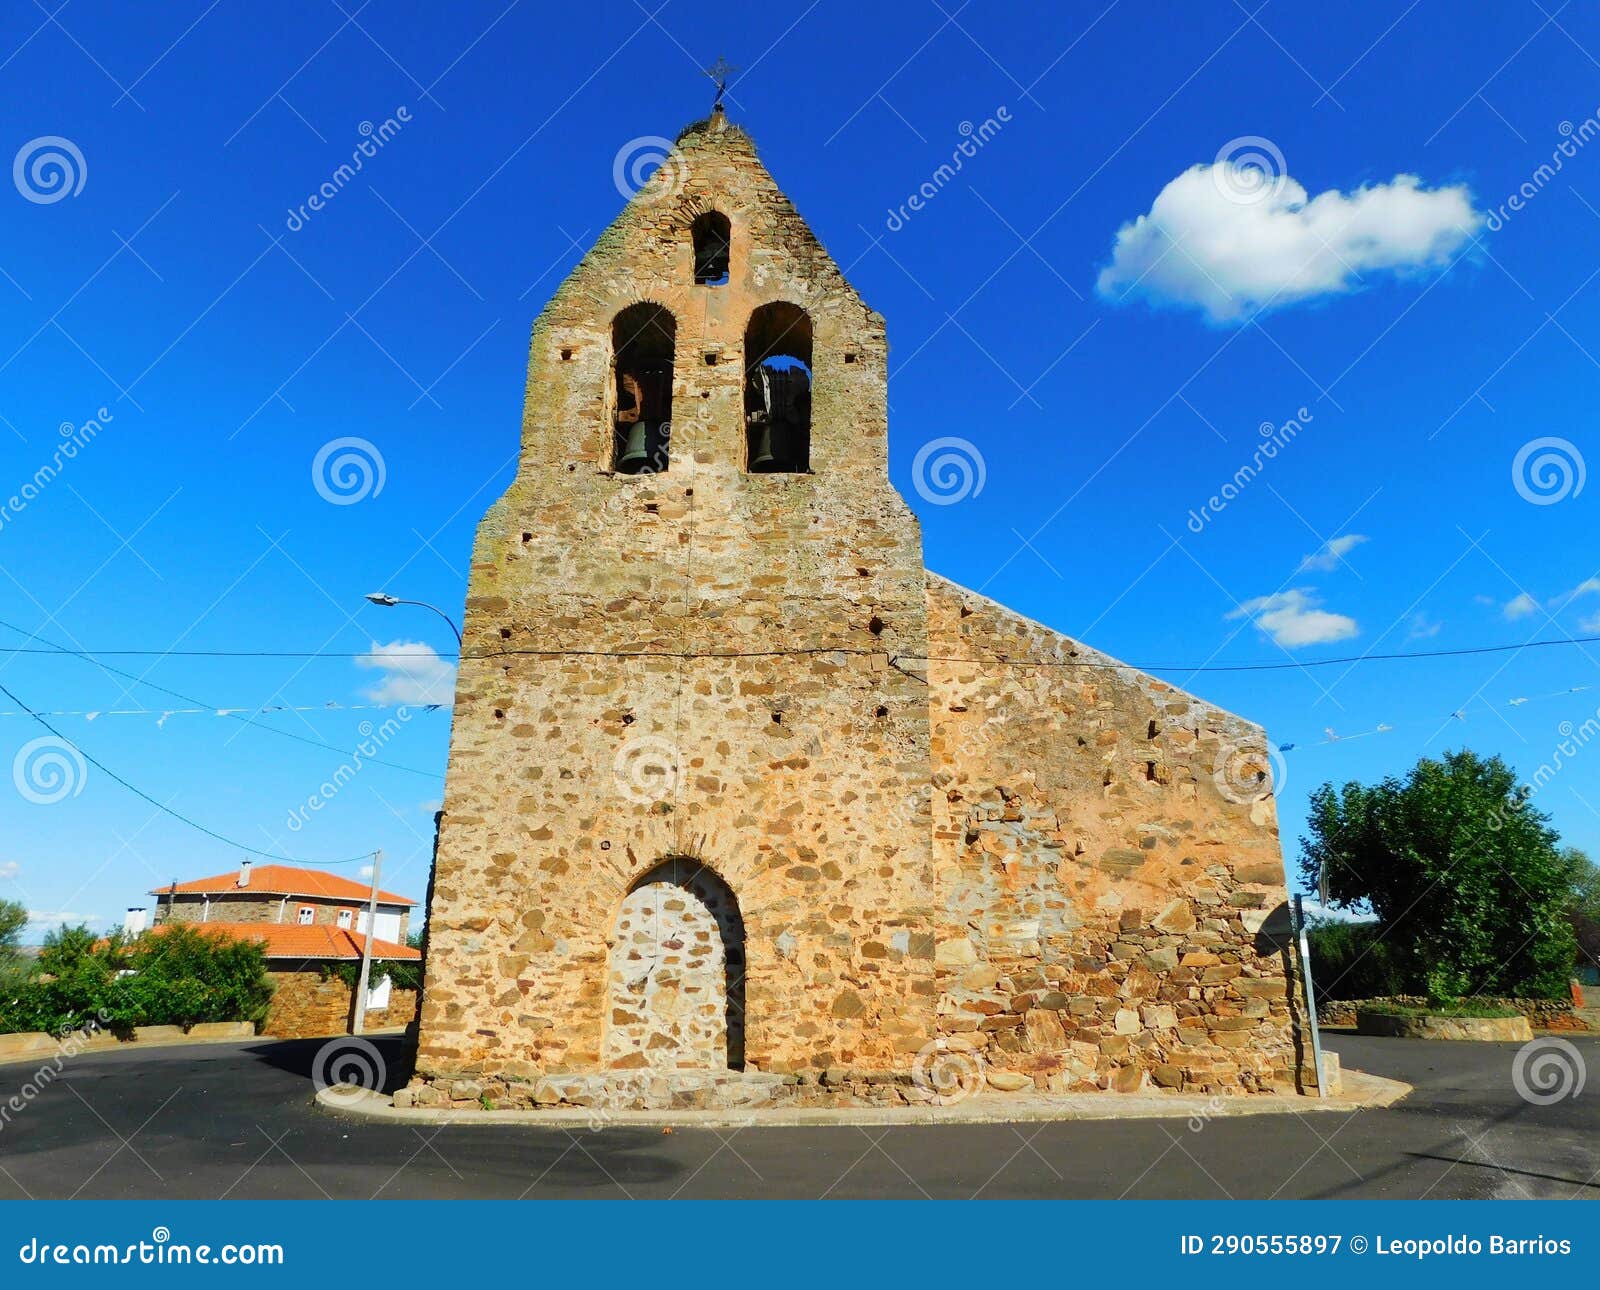 church of tejados in the leonese province